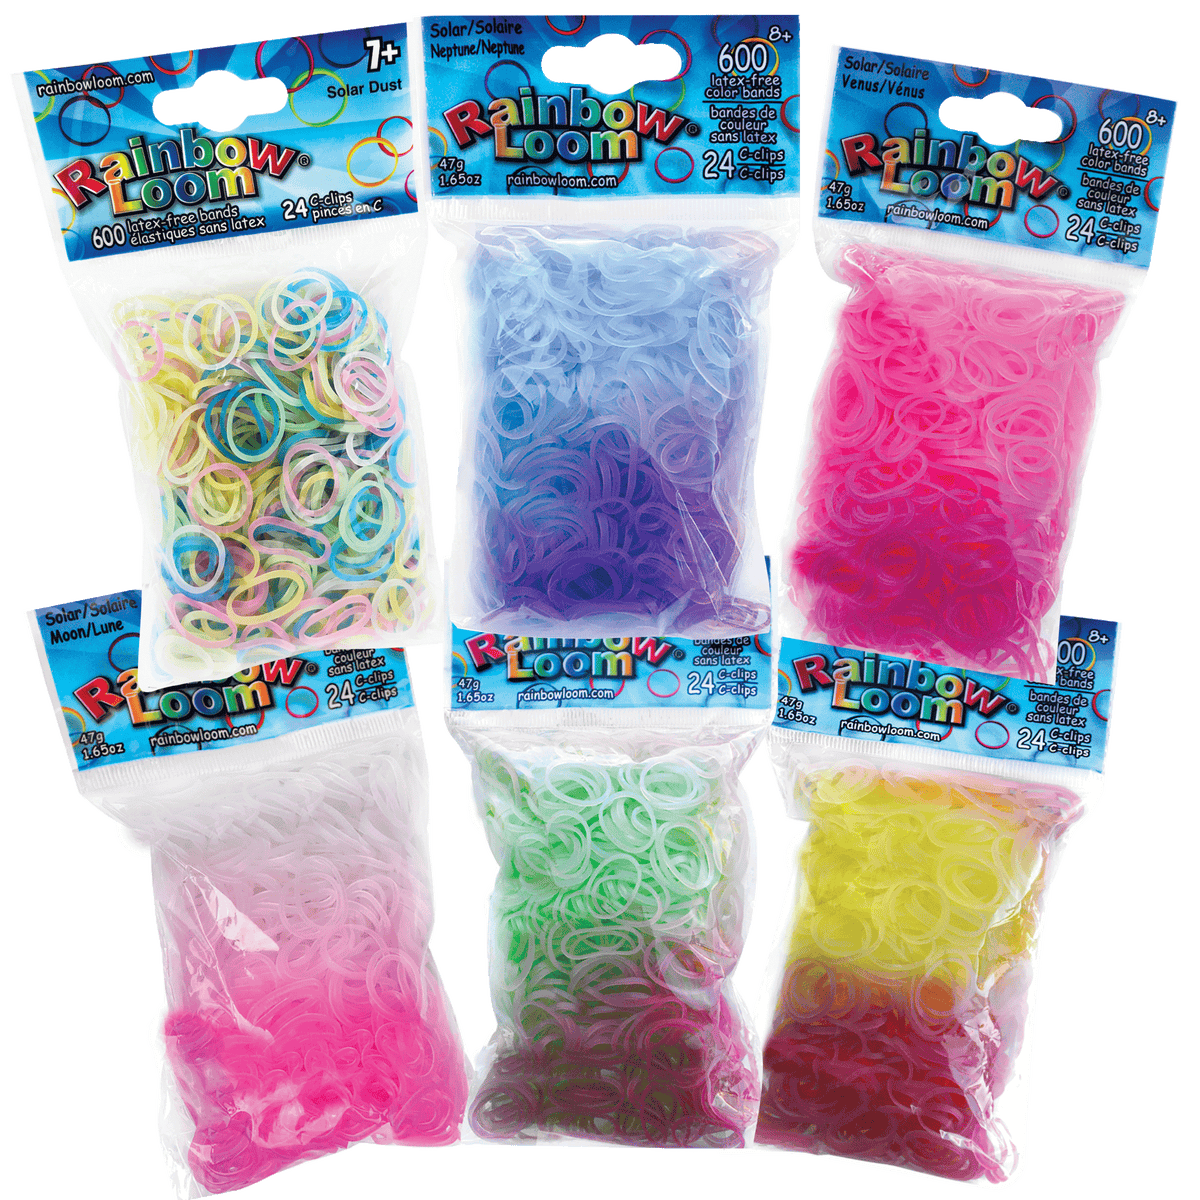 Rainbow Loom Medieval Pink Rubber Bands Refill Pack [600 ct]